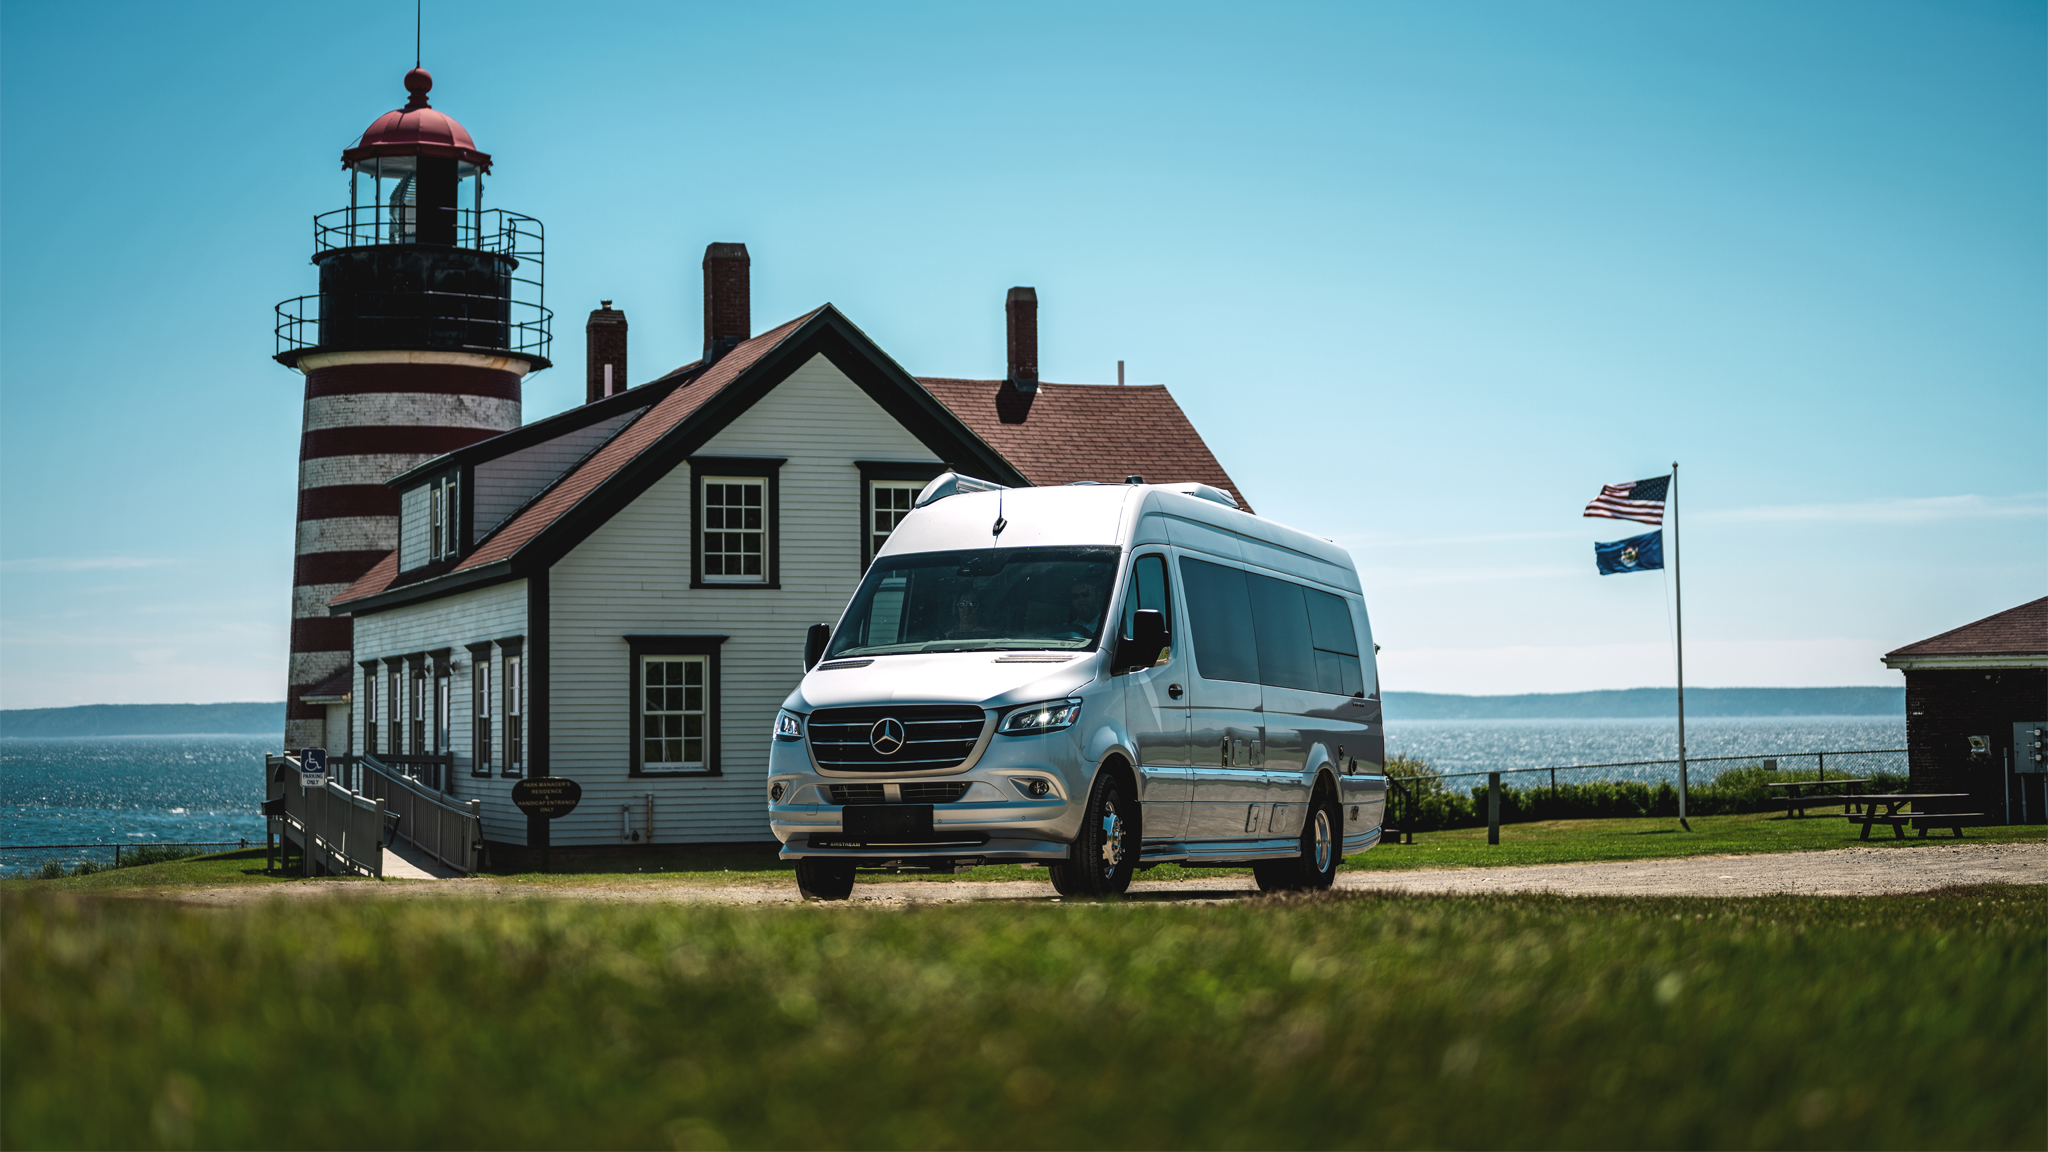 Airstream Interstate 24 Class B Motorhome parked outside a lighthouse with flags flying in the background.